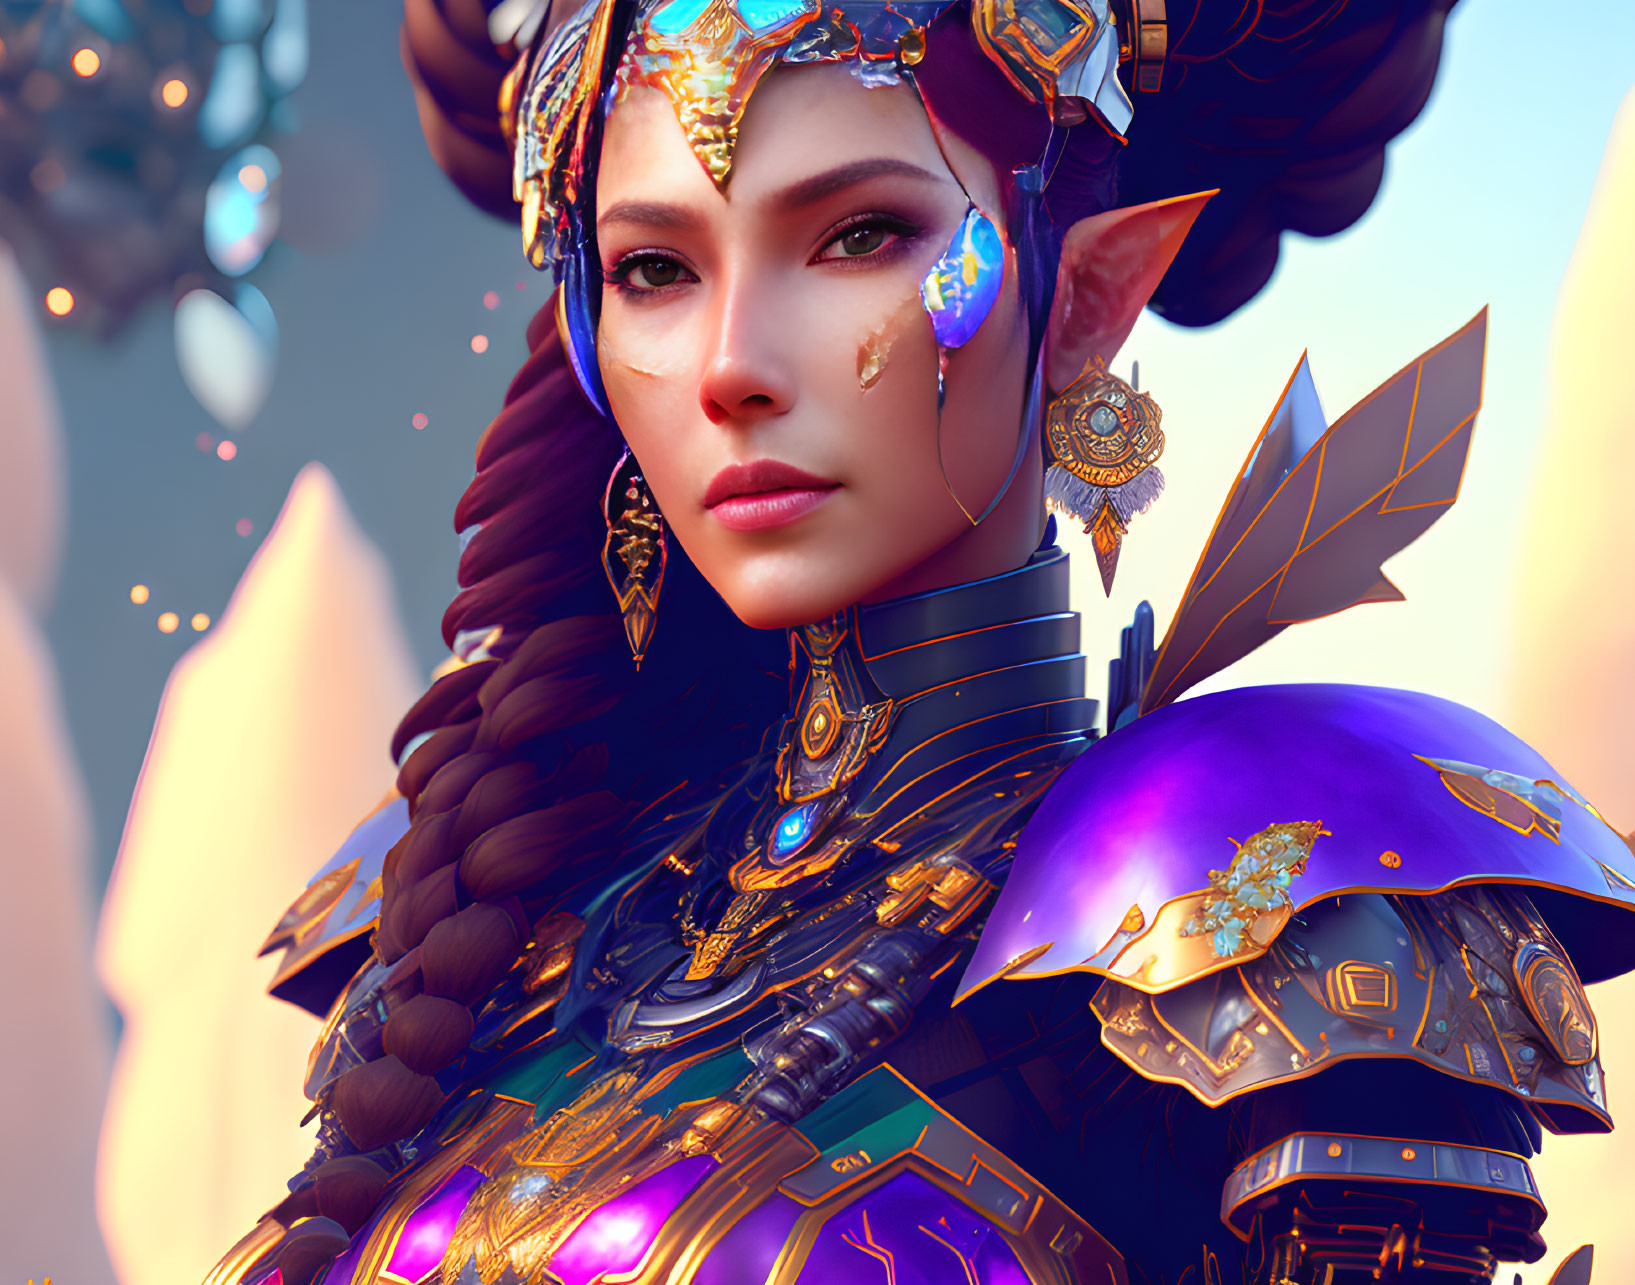 Digital artwork of woman in fantasy armor with gold accents and jewels